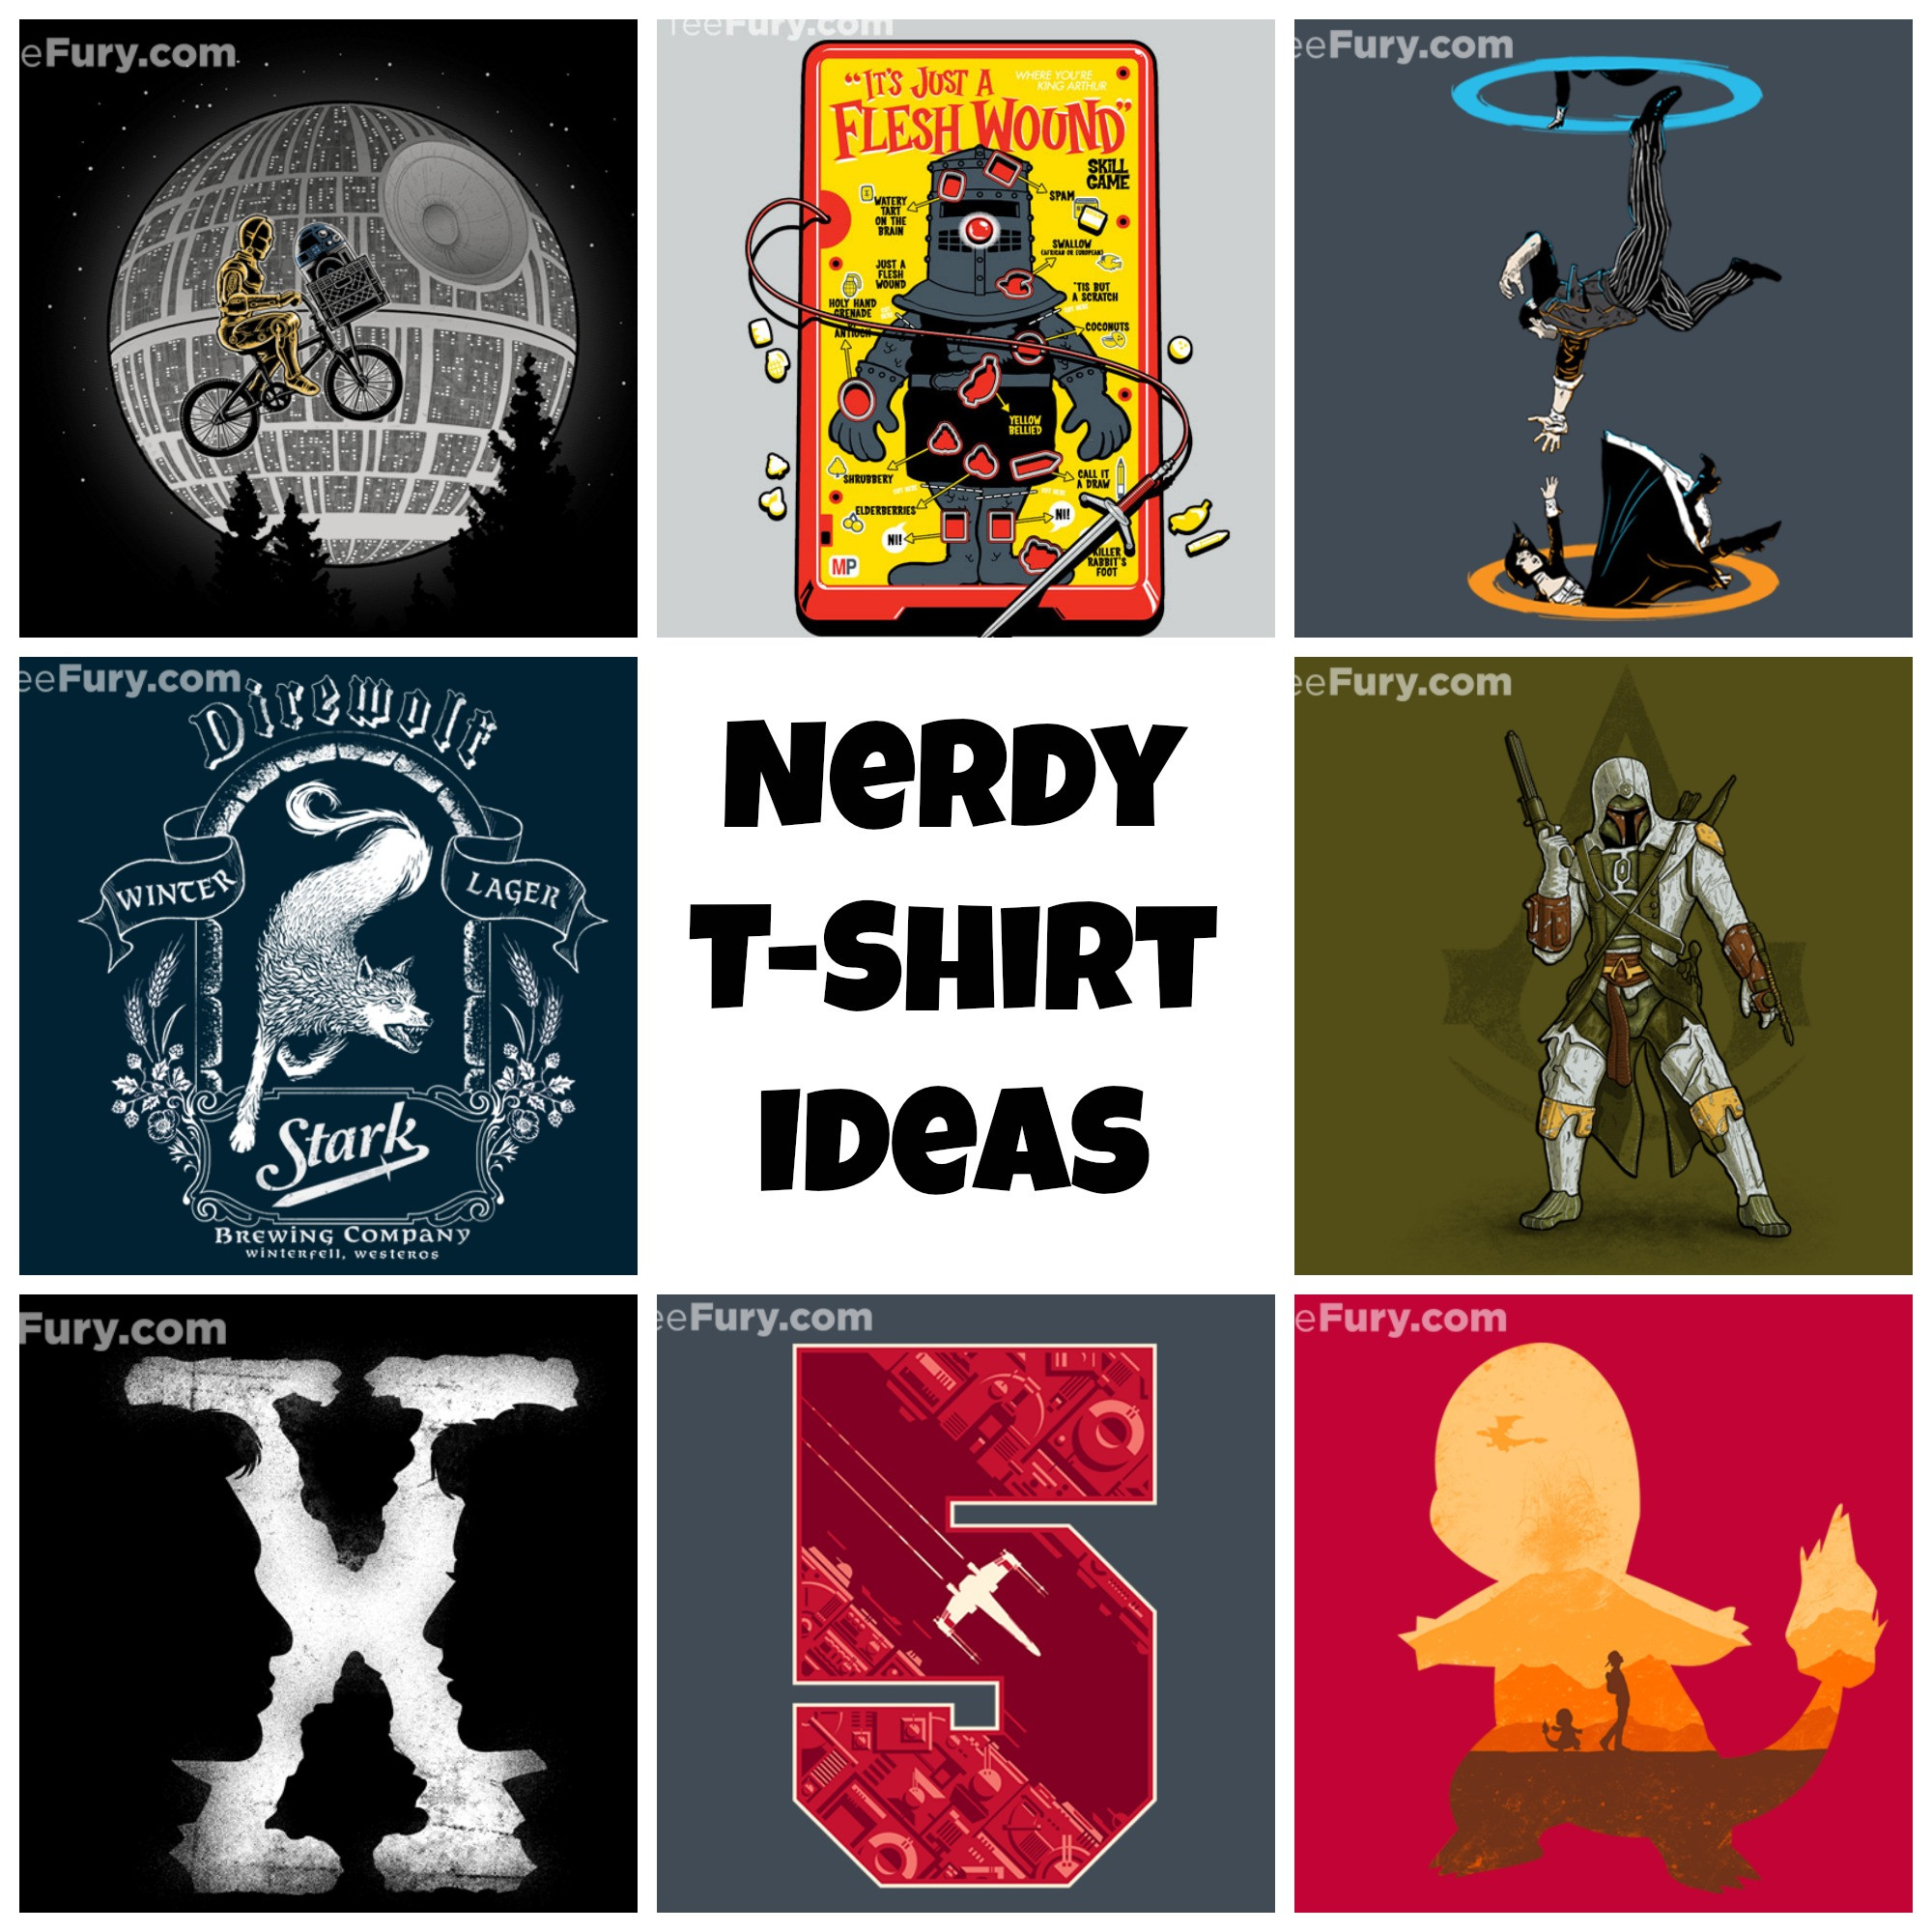 Gift Ideas For Nerdy Boyfriend
 Nerdy T shirt Gift Ideas for the Nerd in your Life